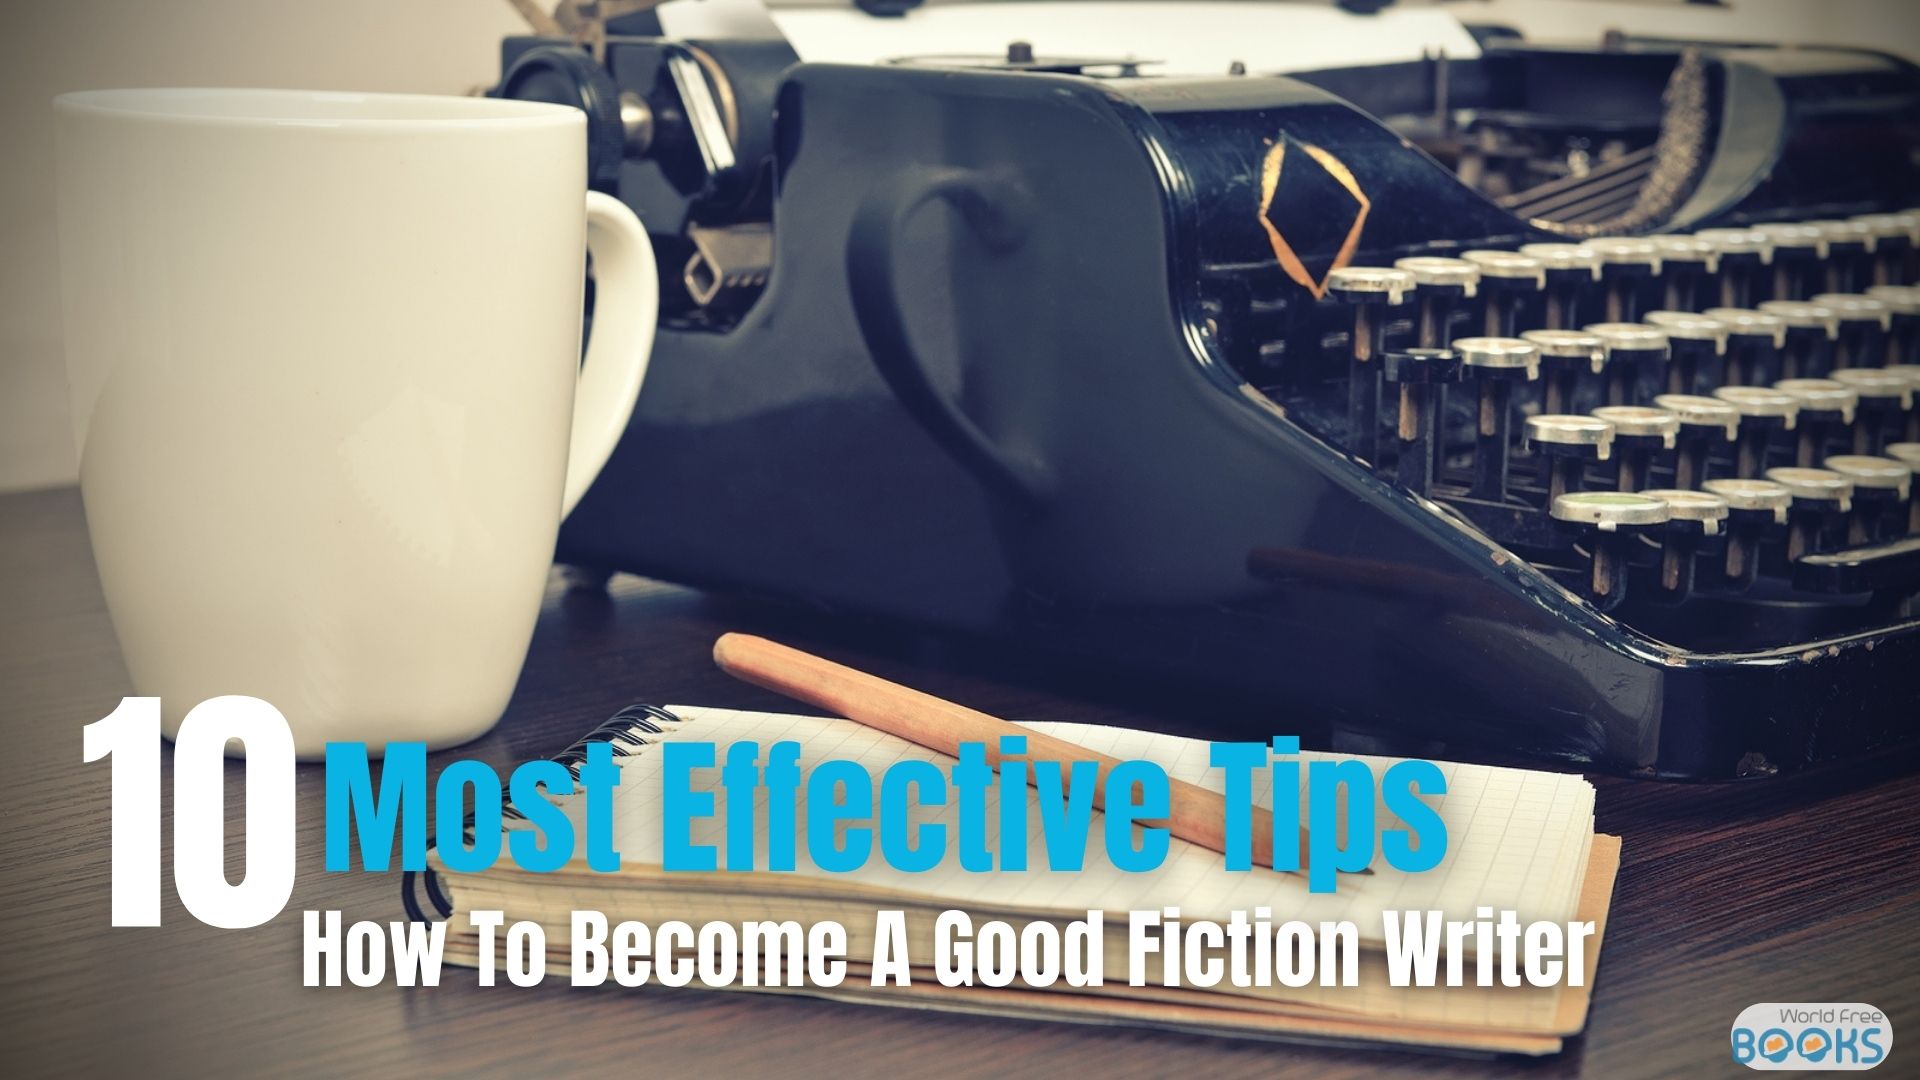 How To Become A Good Fiction Writer: 10 Most Effective Tips